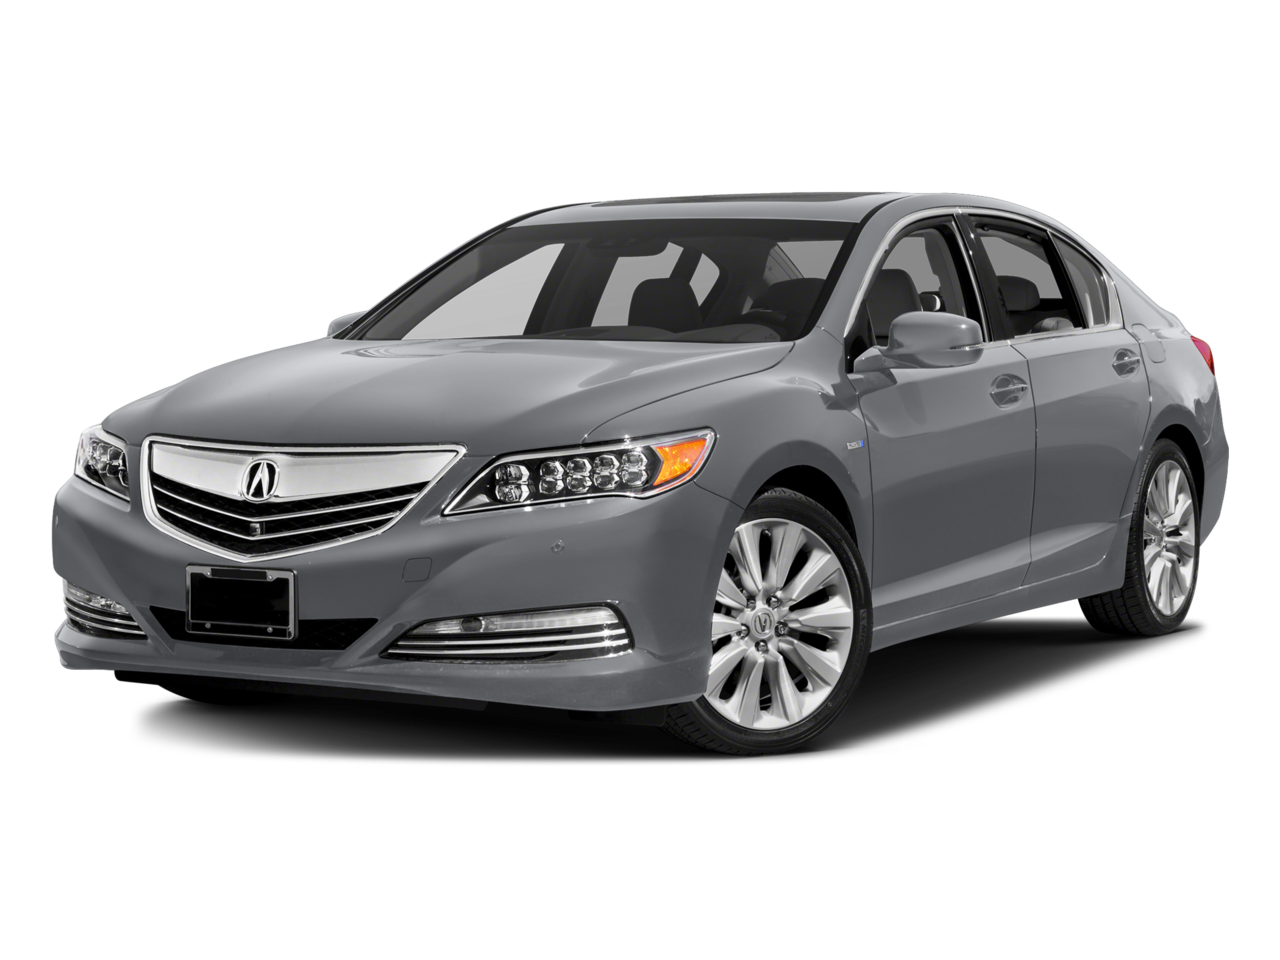 2016 Acura RLX Repair: Service and Maintenance Cost